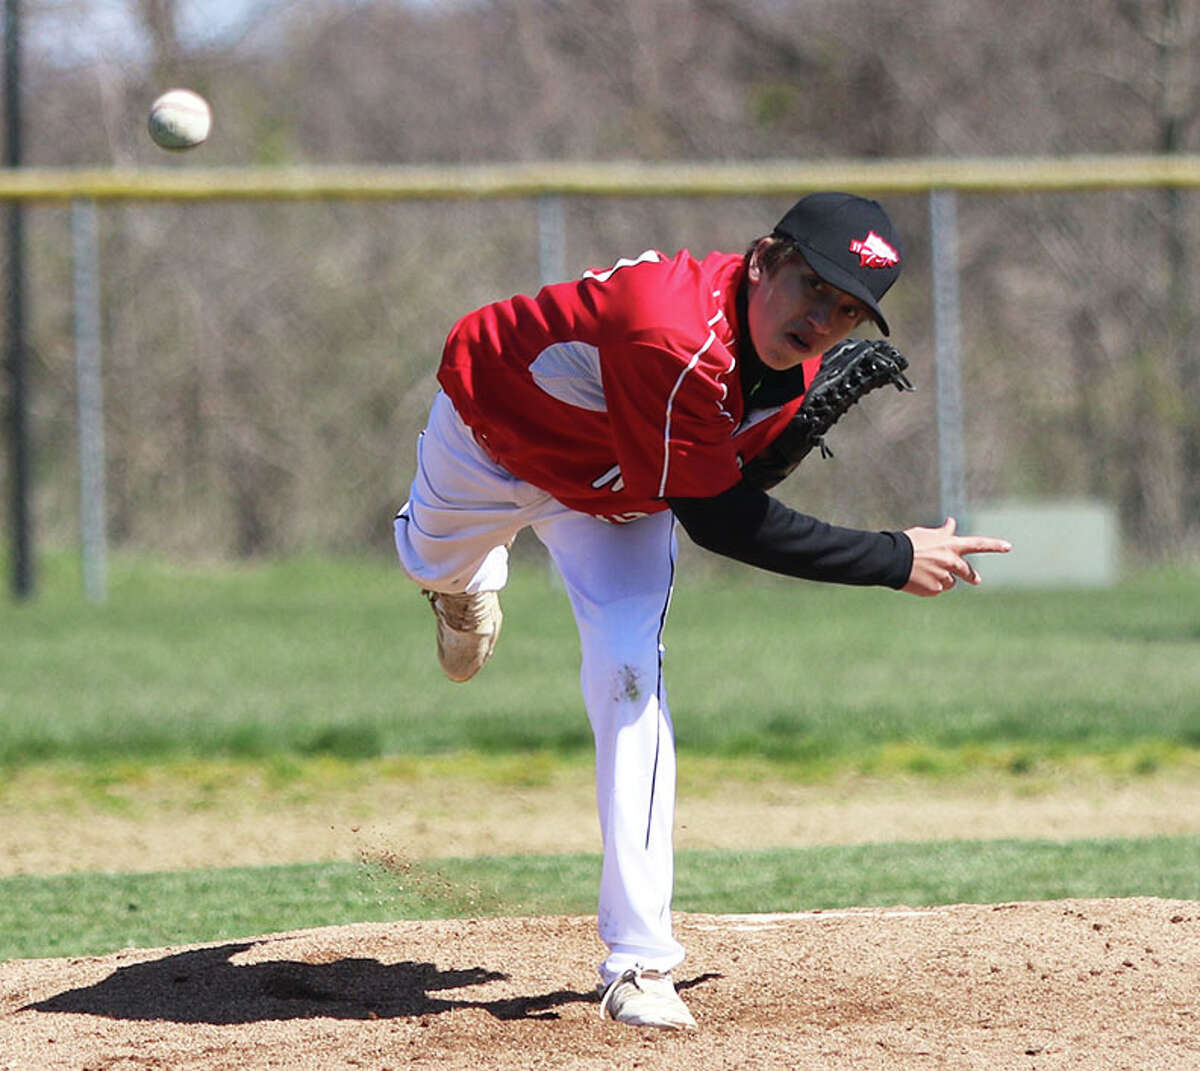 Calhoun's Jake Kress, shown in a game earlier this season, pitched six innings and got a win in the Warriors' doubleheader sweep of Metro-East Lutheran on Saturday in Edwardsville.